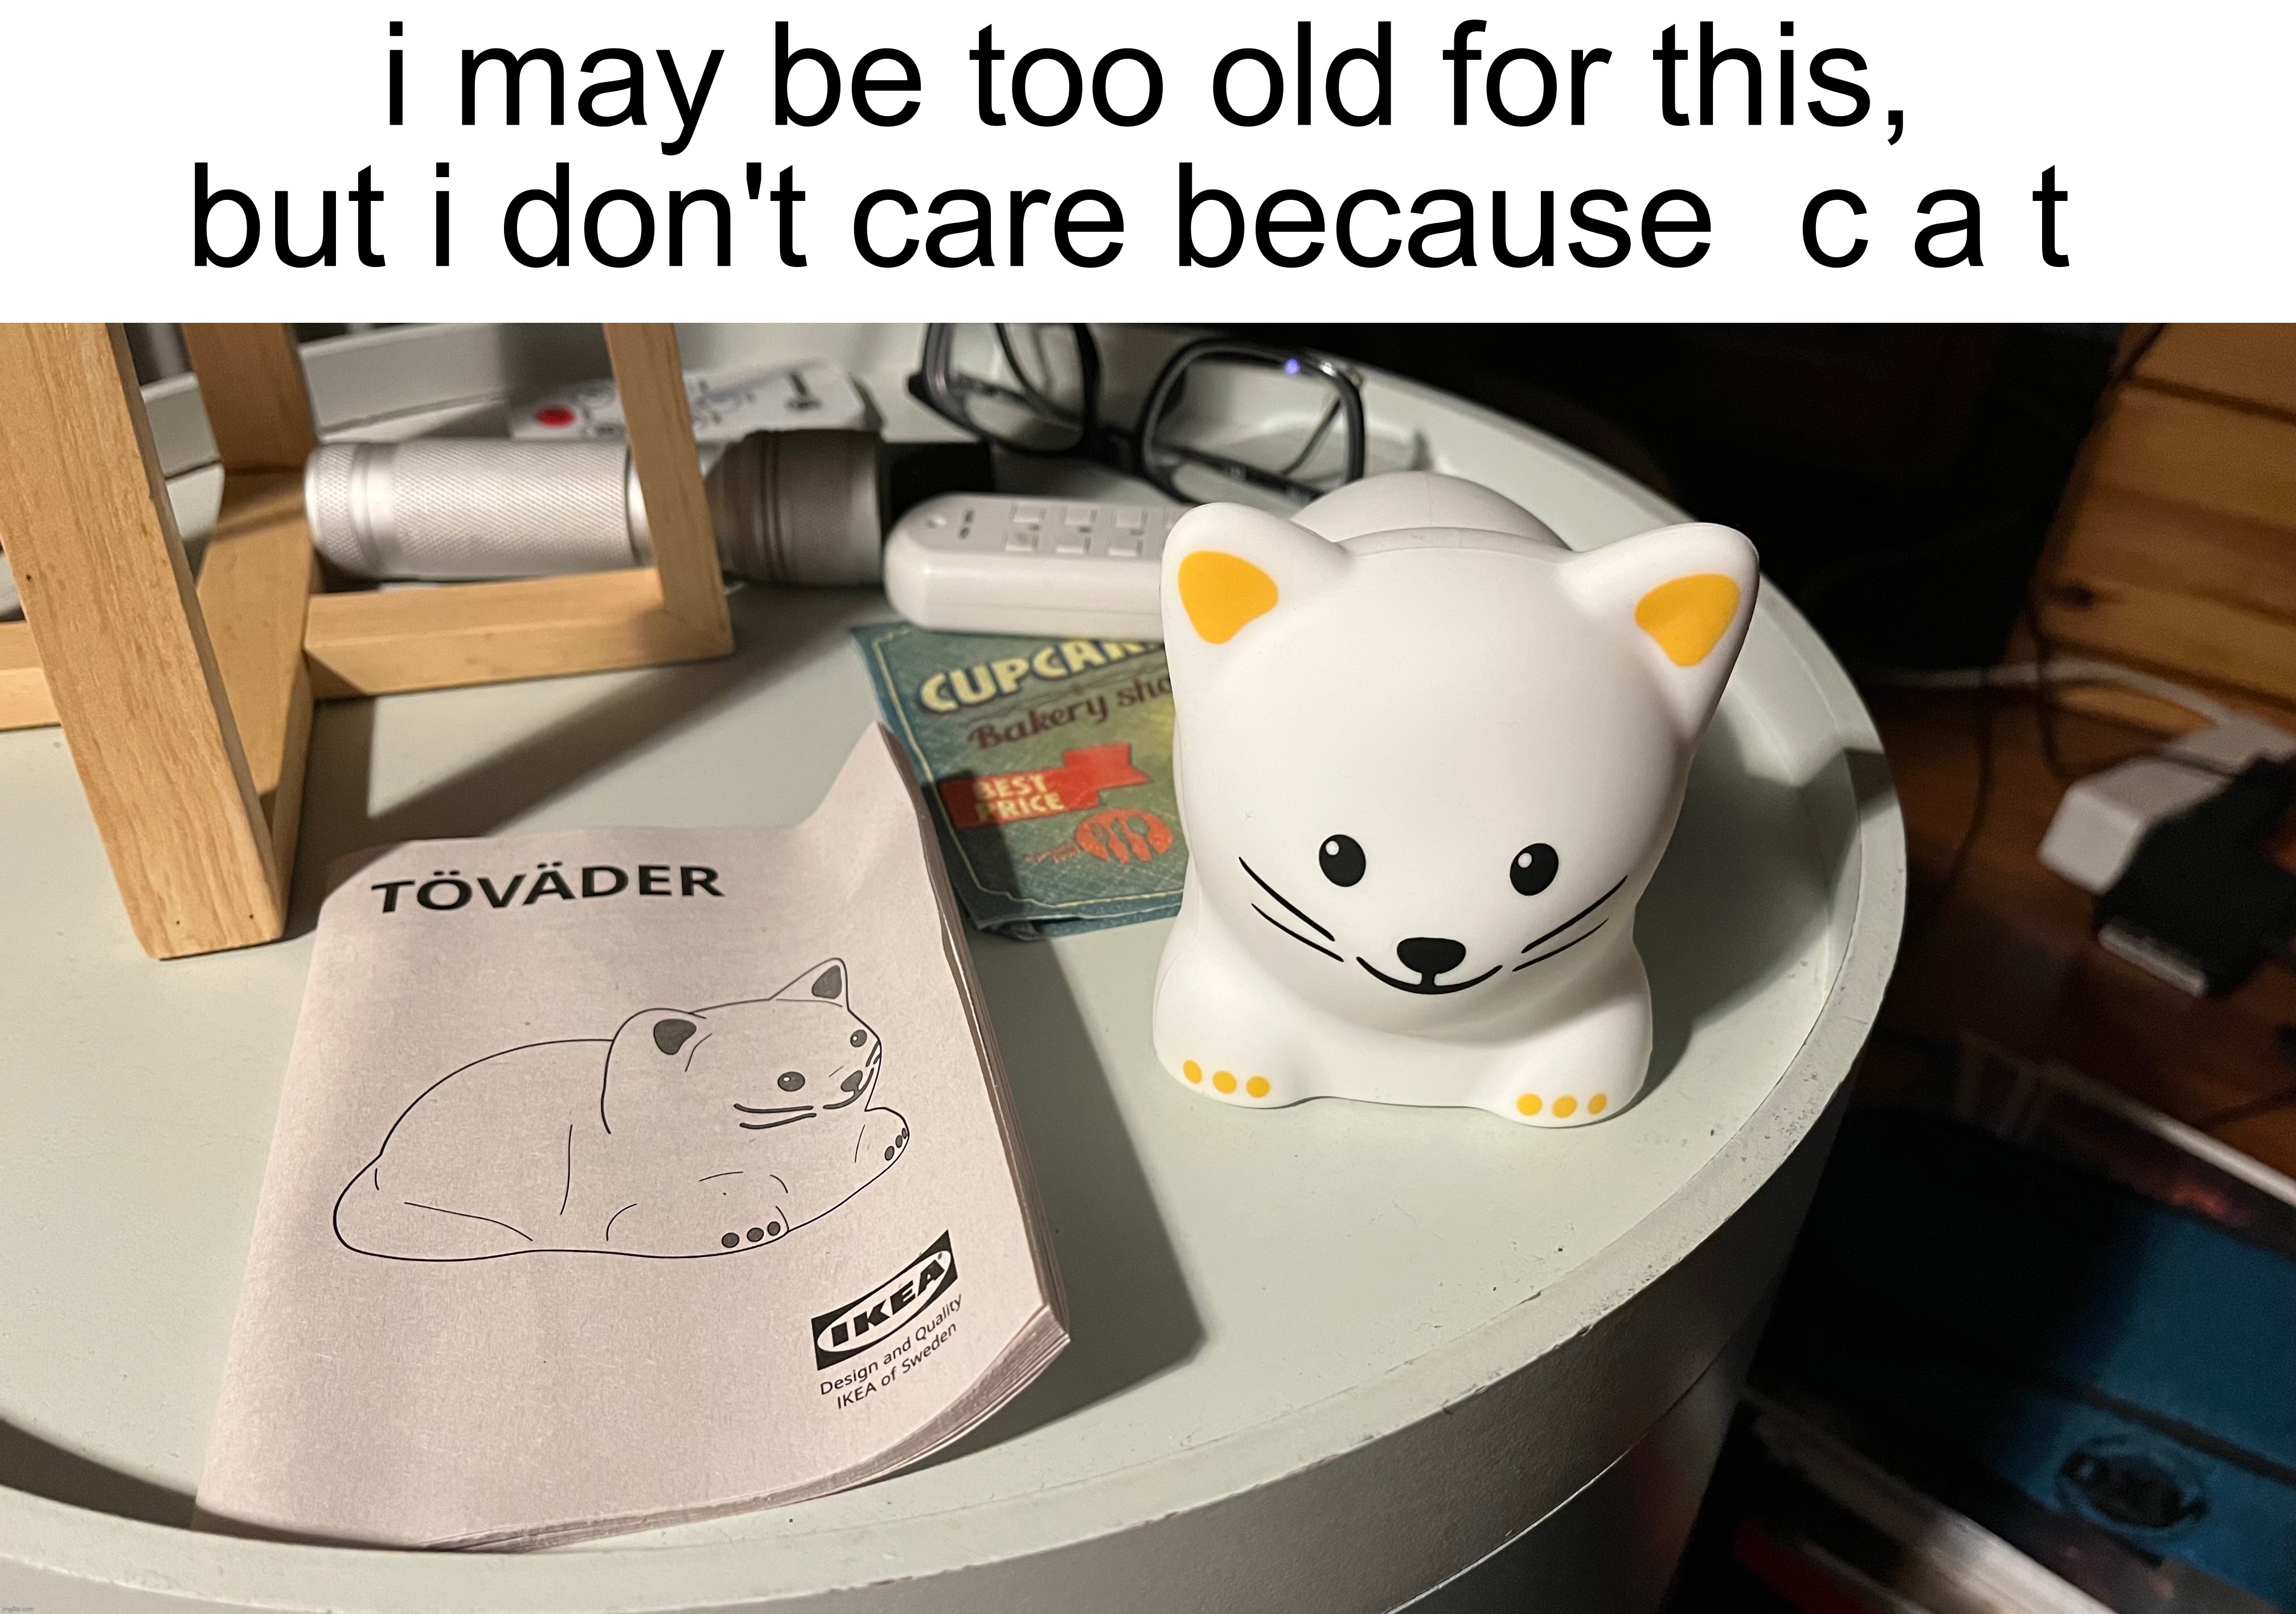 i may be too old for this, but i don't care because  c a t | image tagged in share your own photos,cats,ikea,product,idk | made w/ Imgflip meme maker